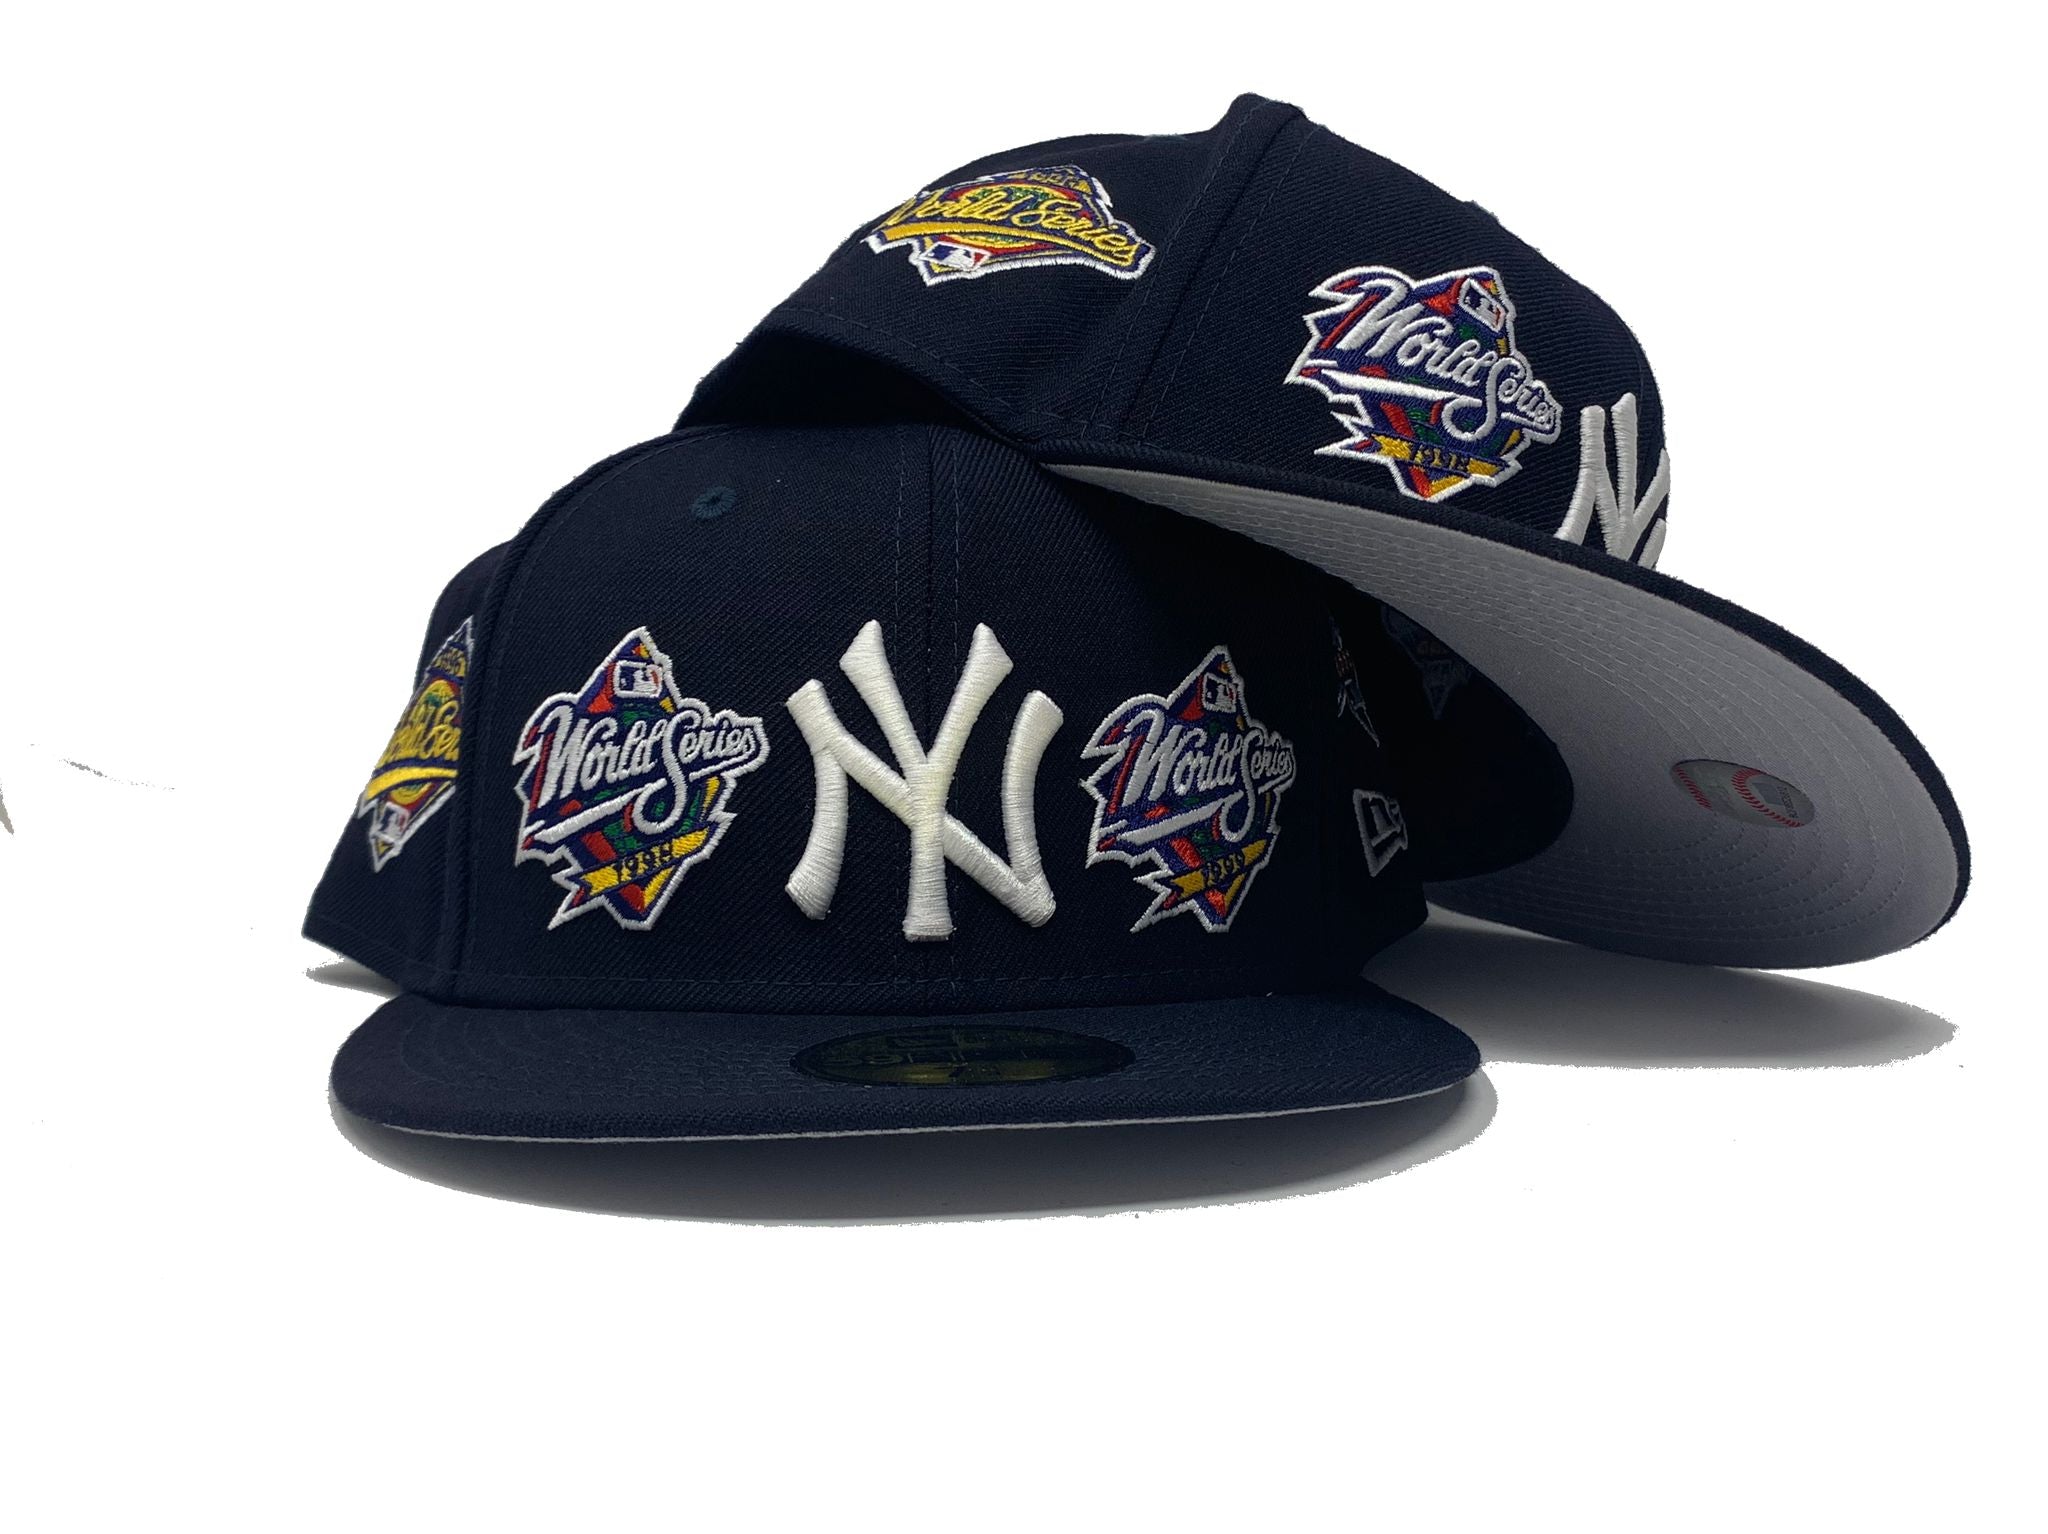 New York Yankees City Champions Best Team Navy Design Personalized